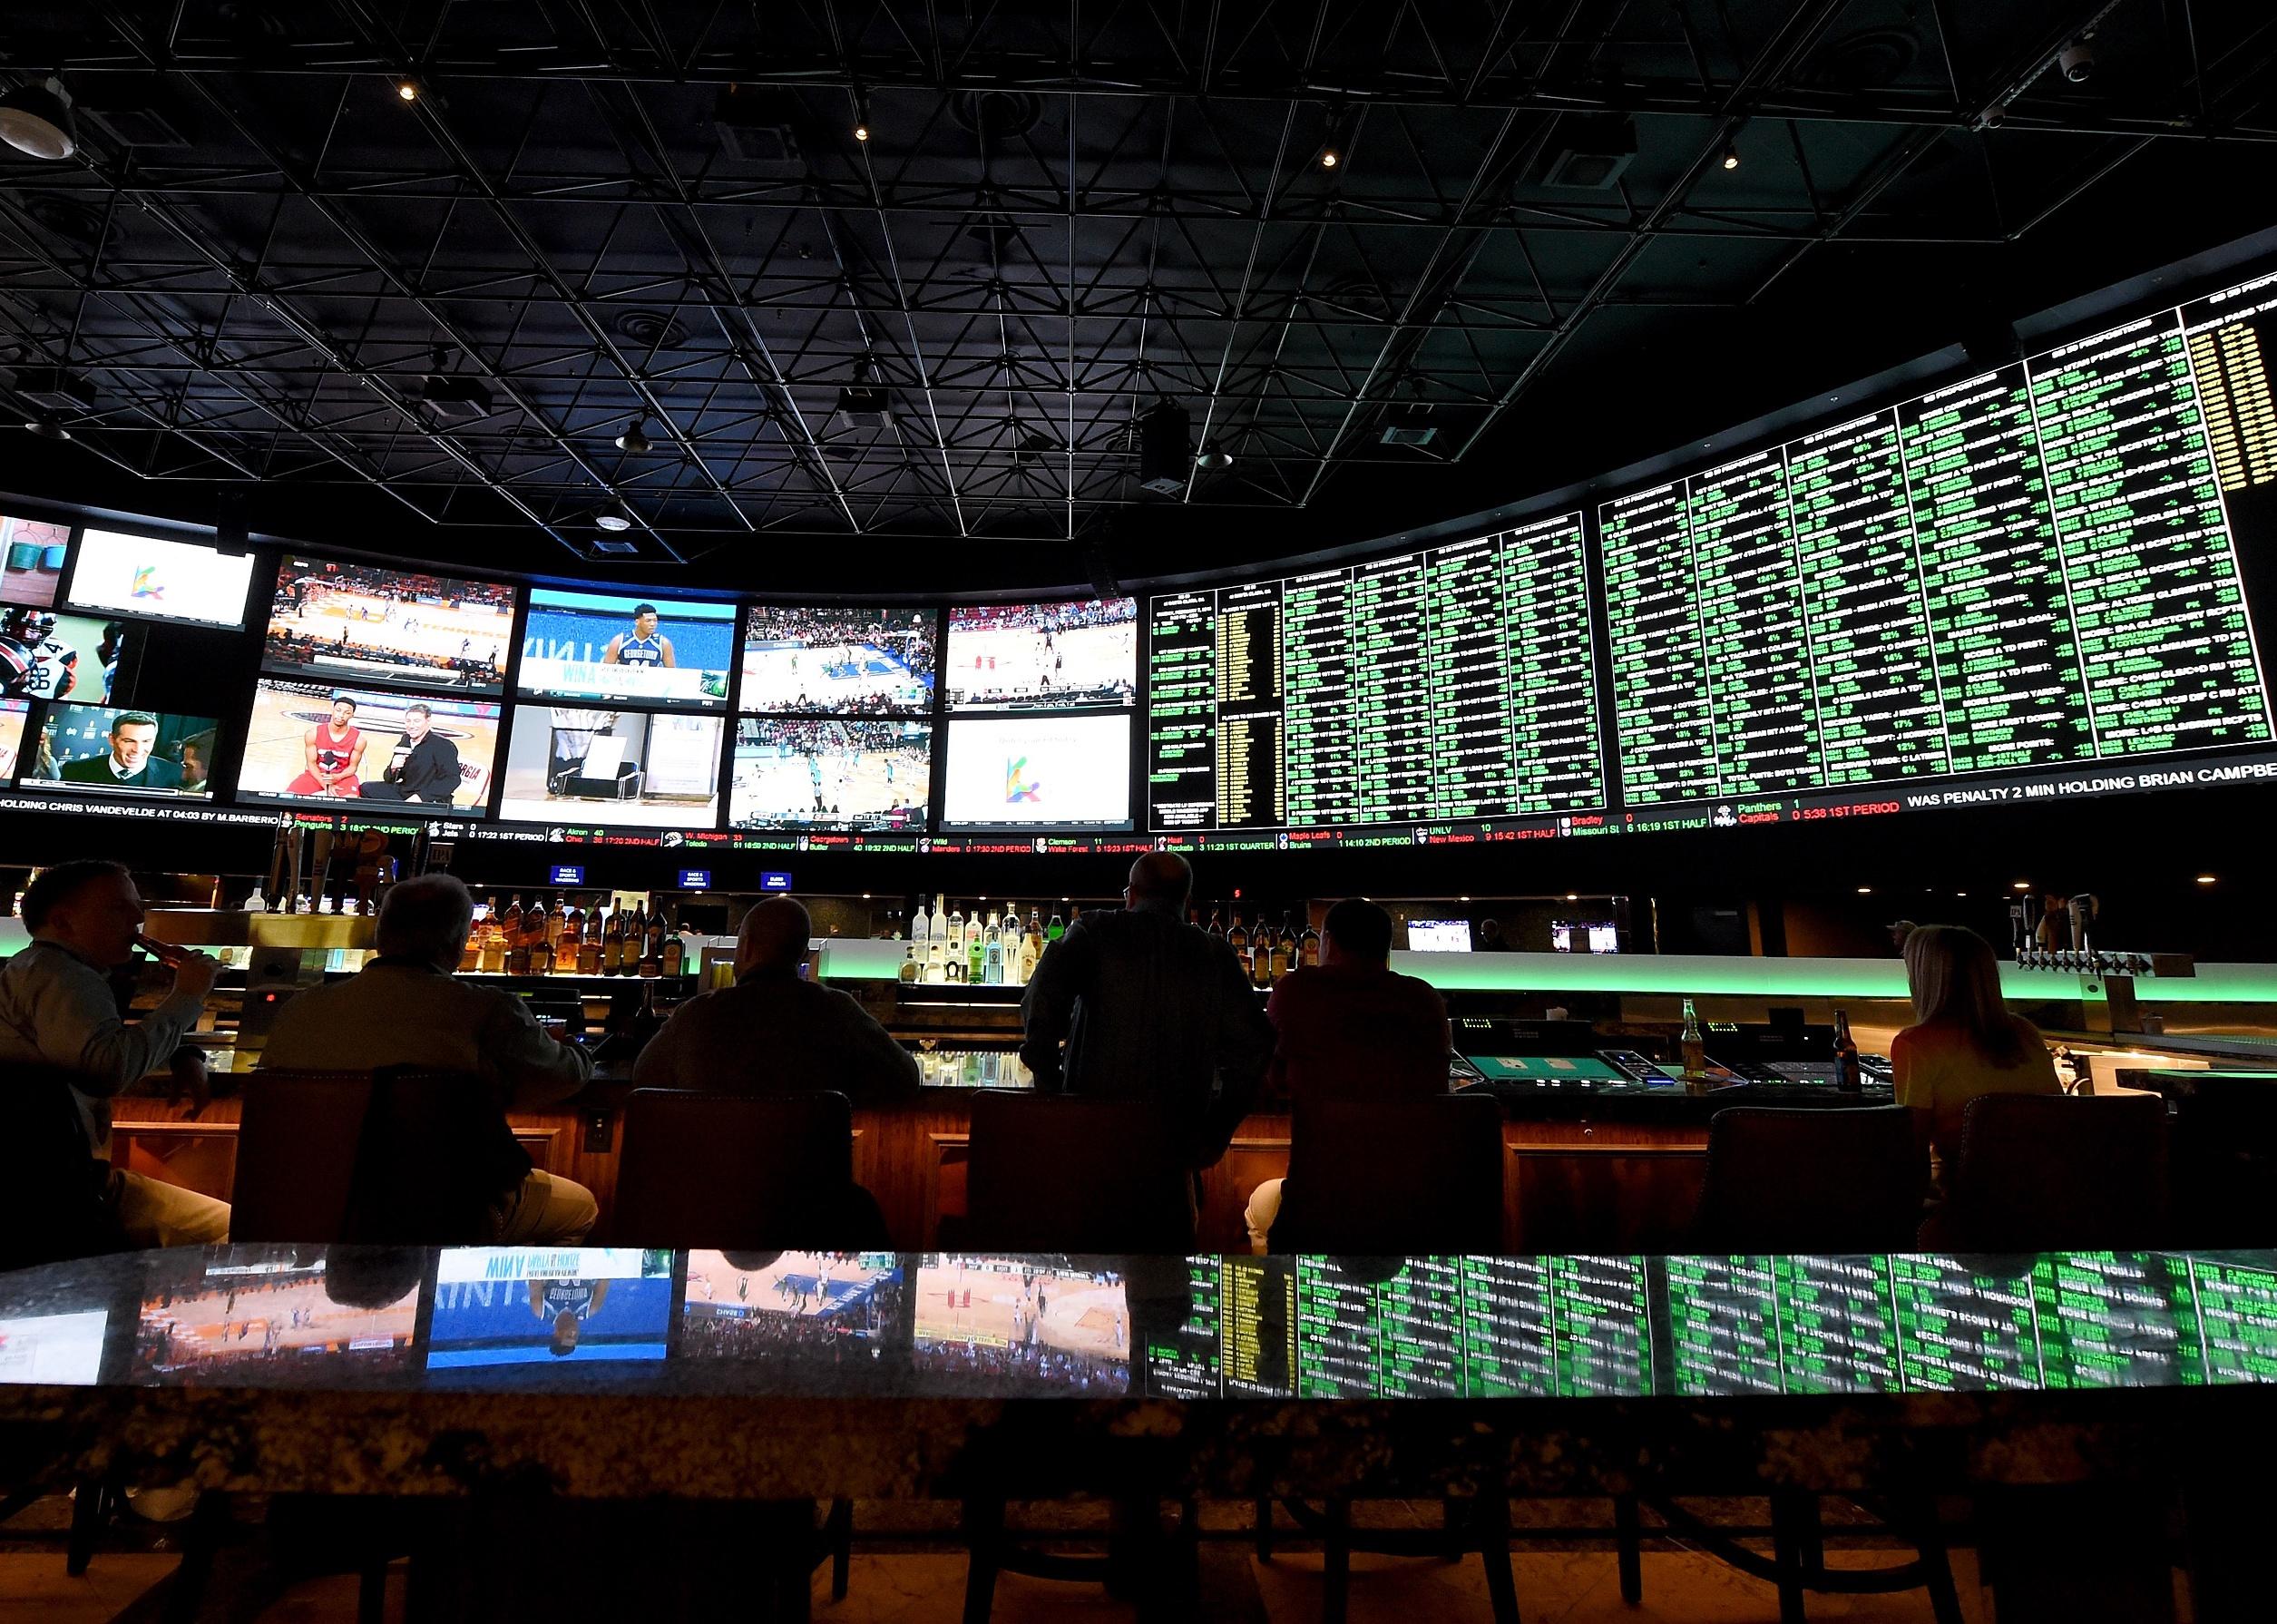 Screens showing games along with the betting line and some of the nearly 400 proposition bets for Super Bowl 50.